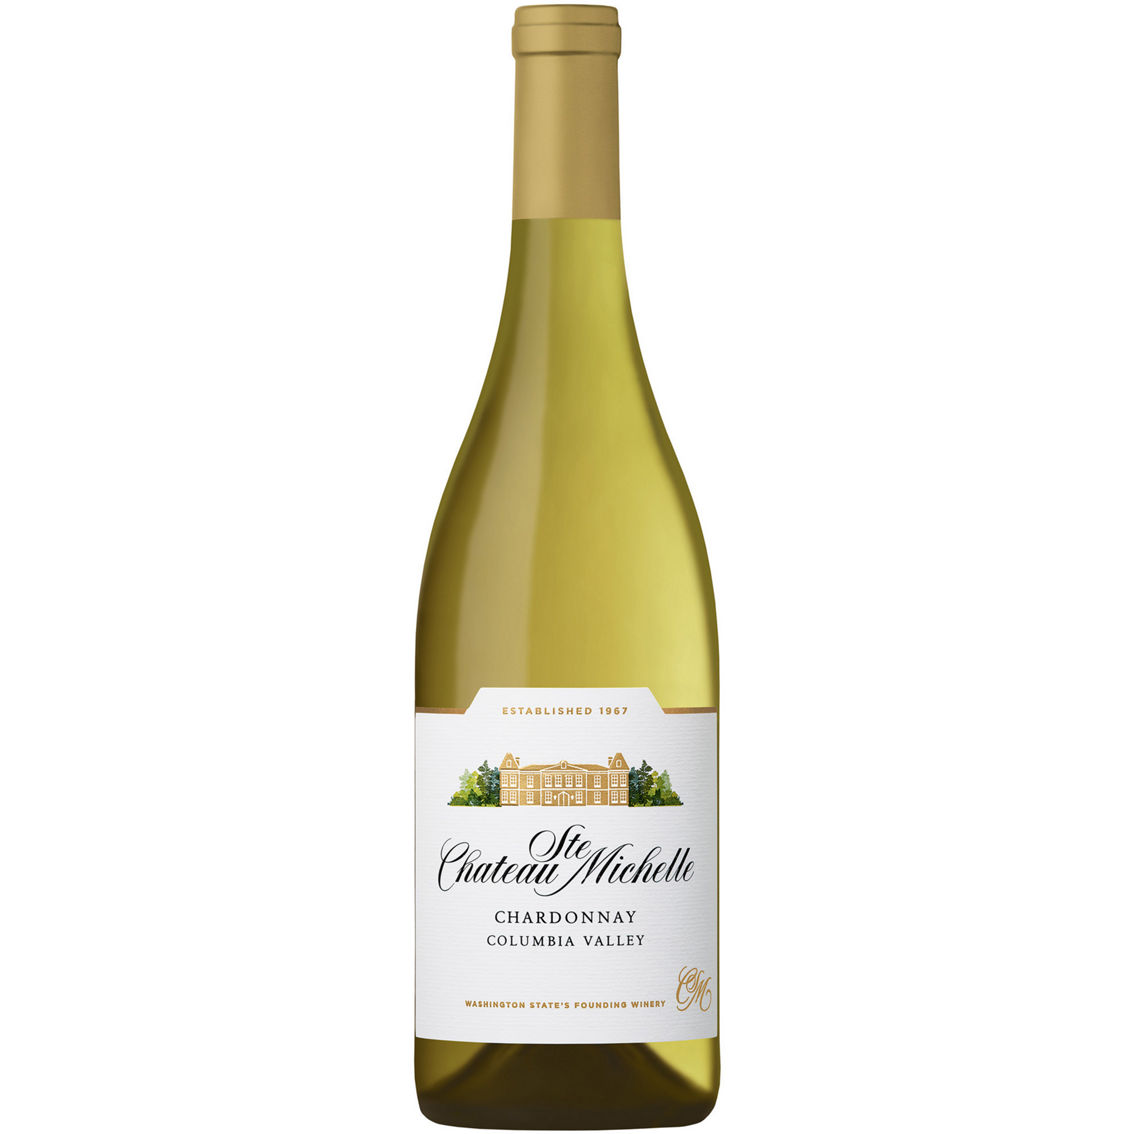 Chateau Ste. Michelle Columbia Valley Chardonnay, 750 ml